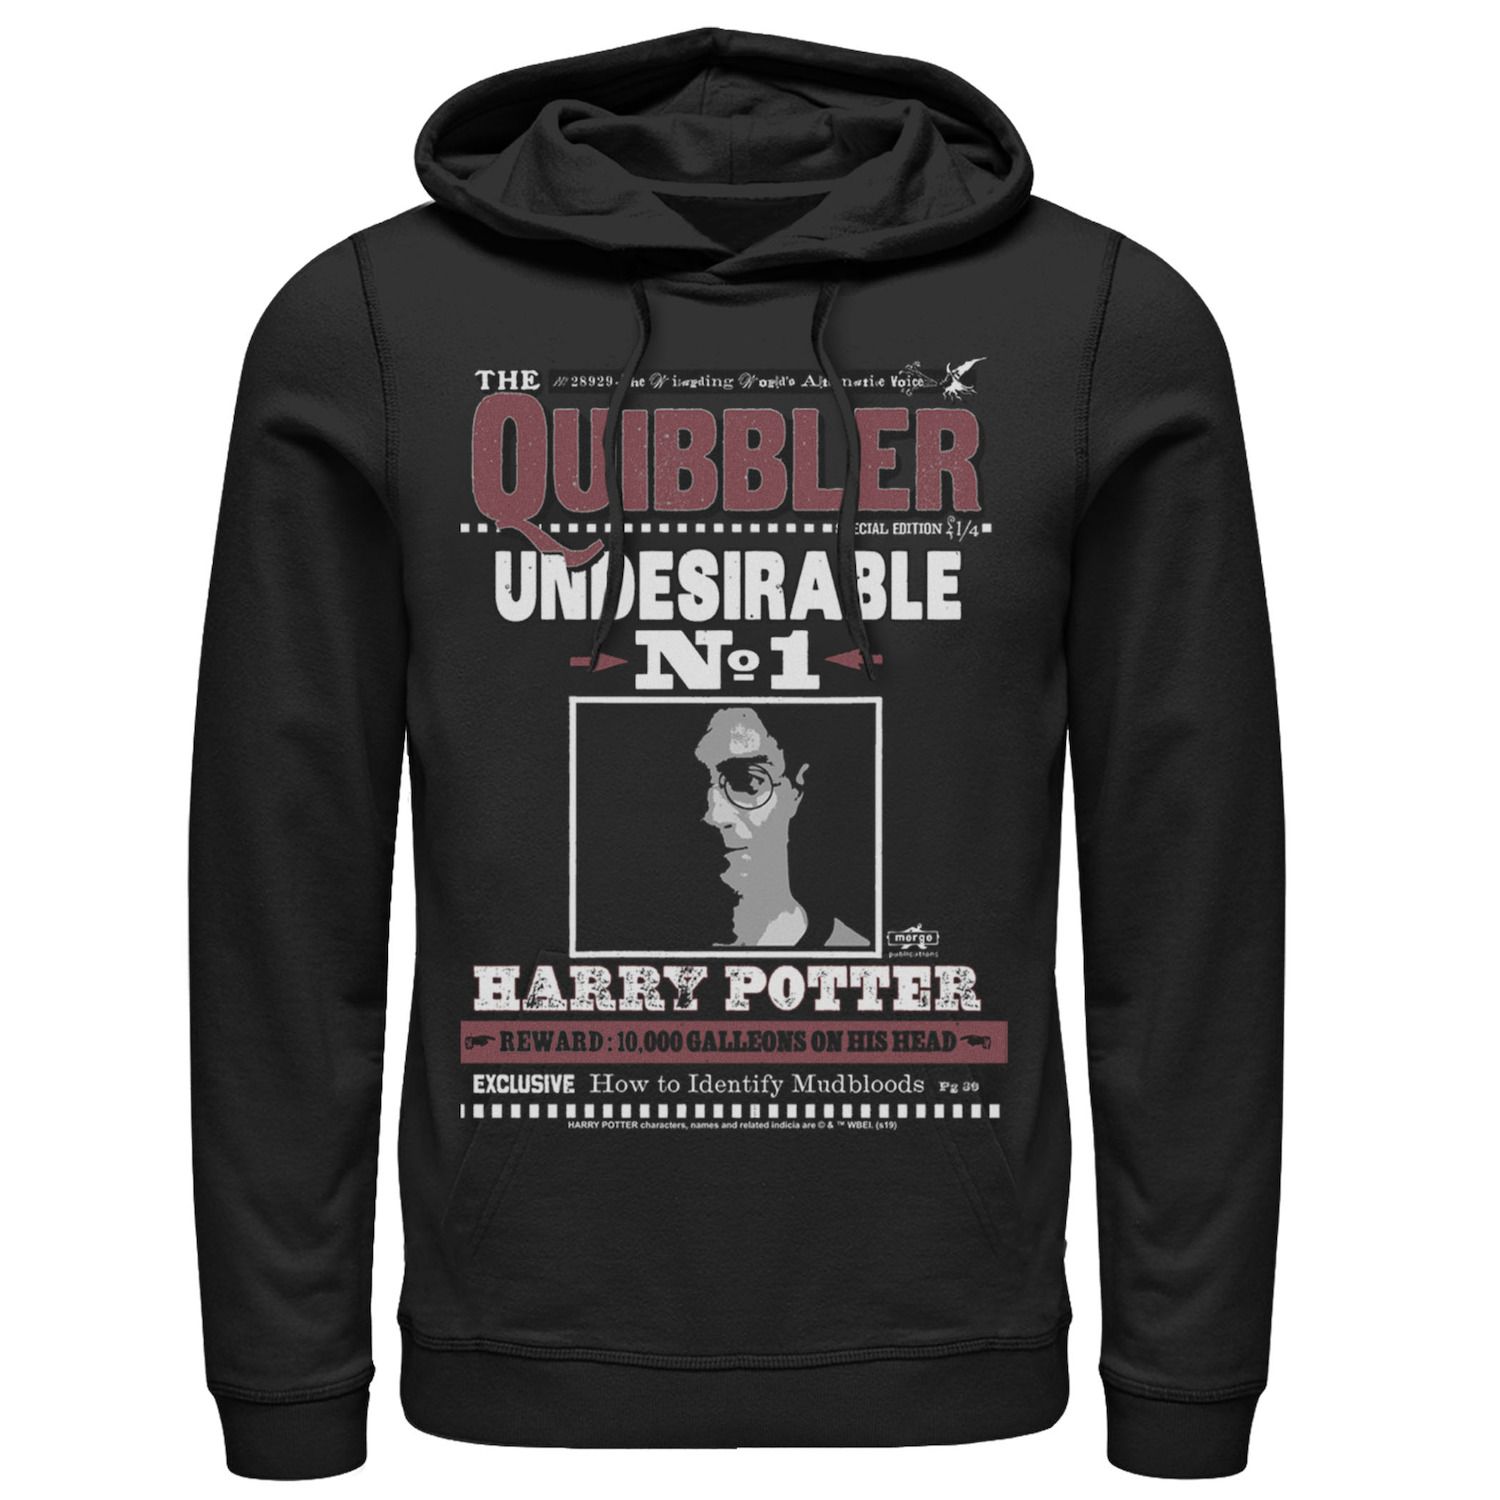 Image for Harry Potter Men's The Quibbler Undesirable Number 1 Graphic Pullover Hoodie at Kohl's.